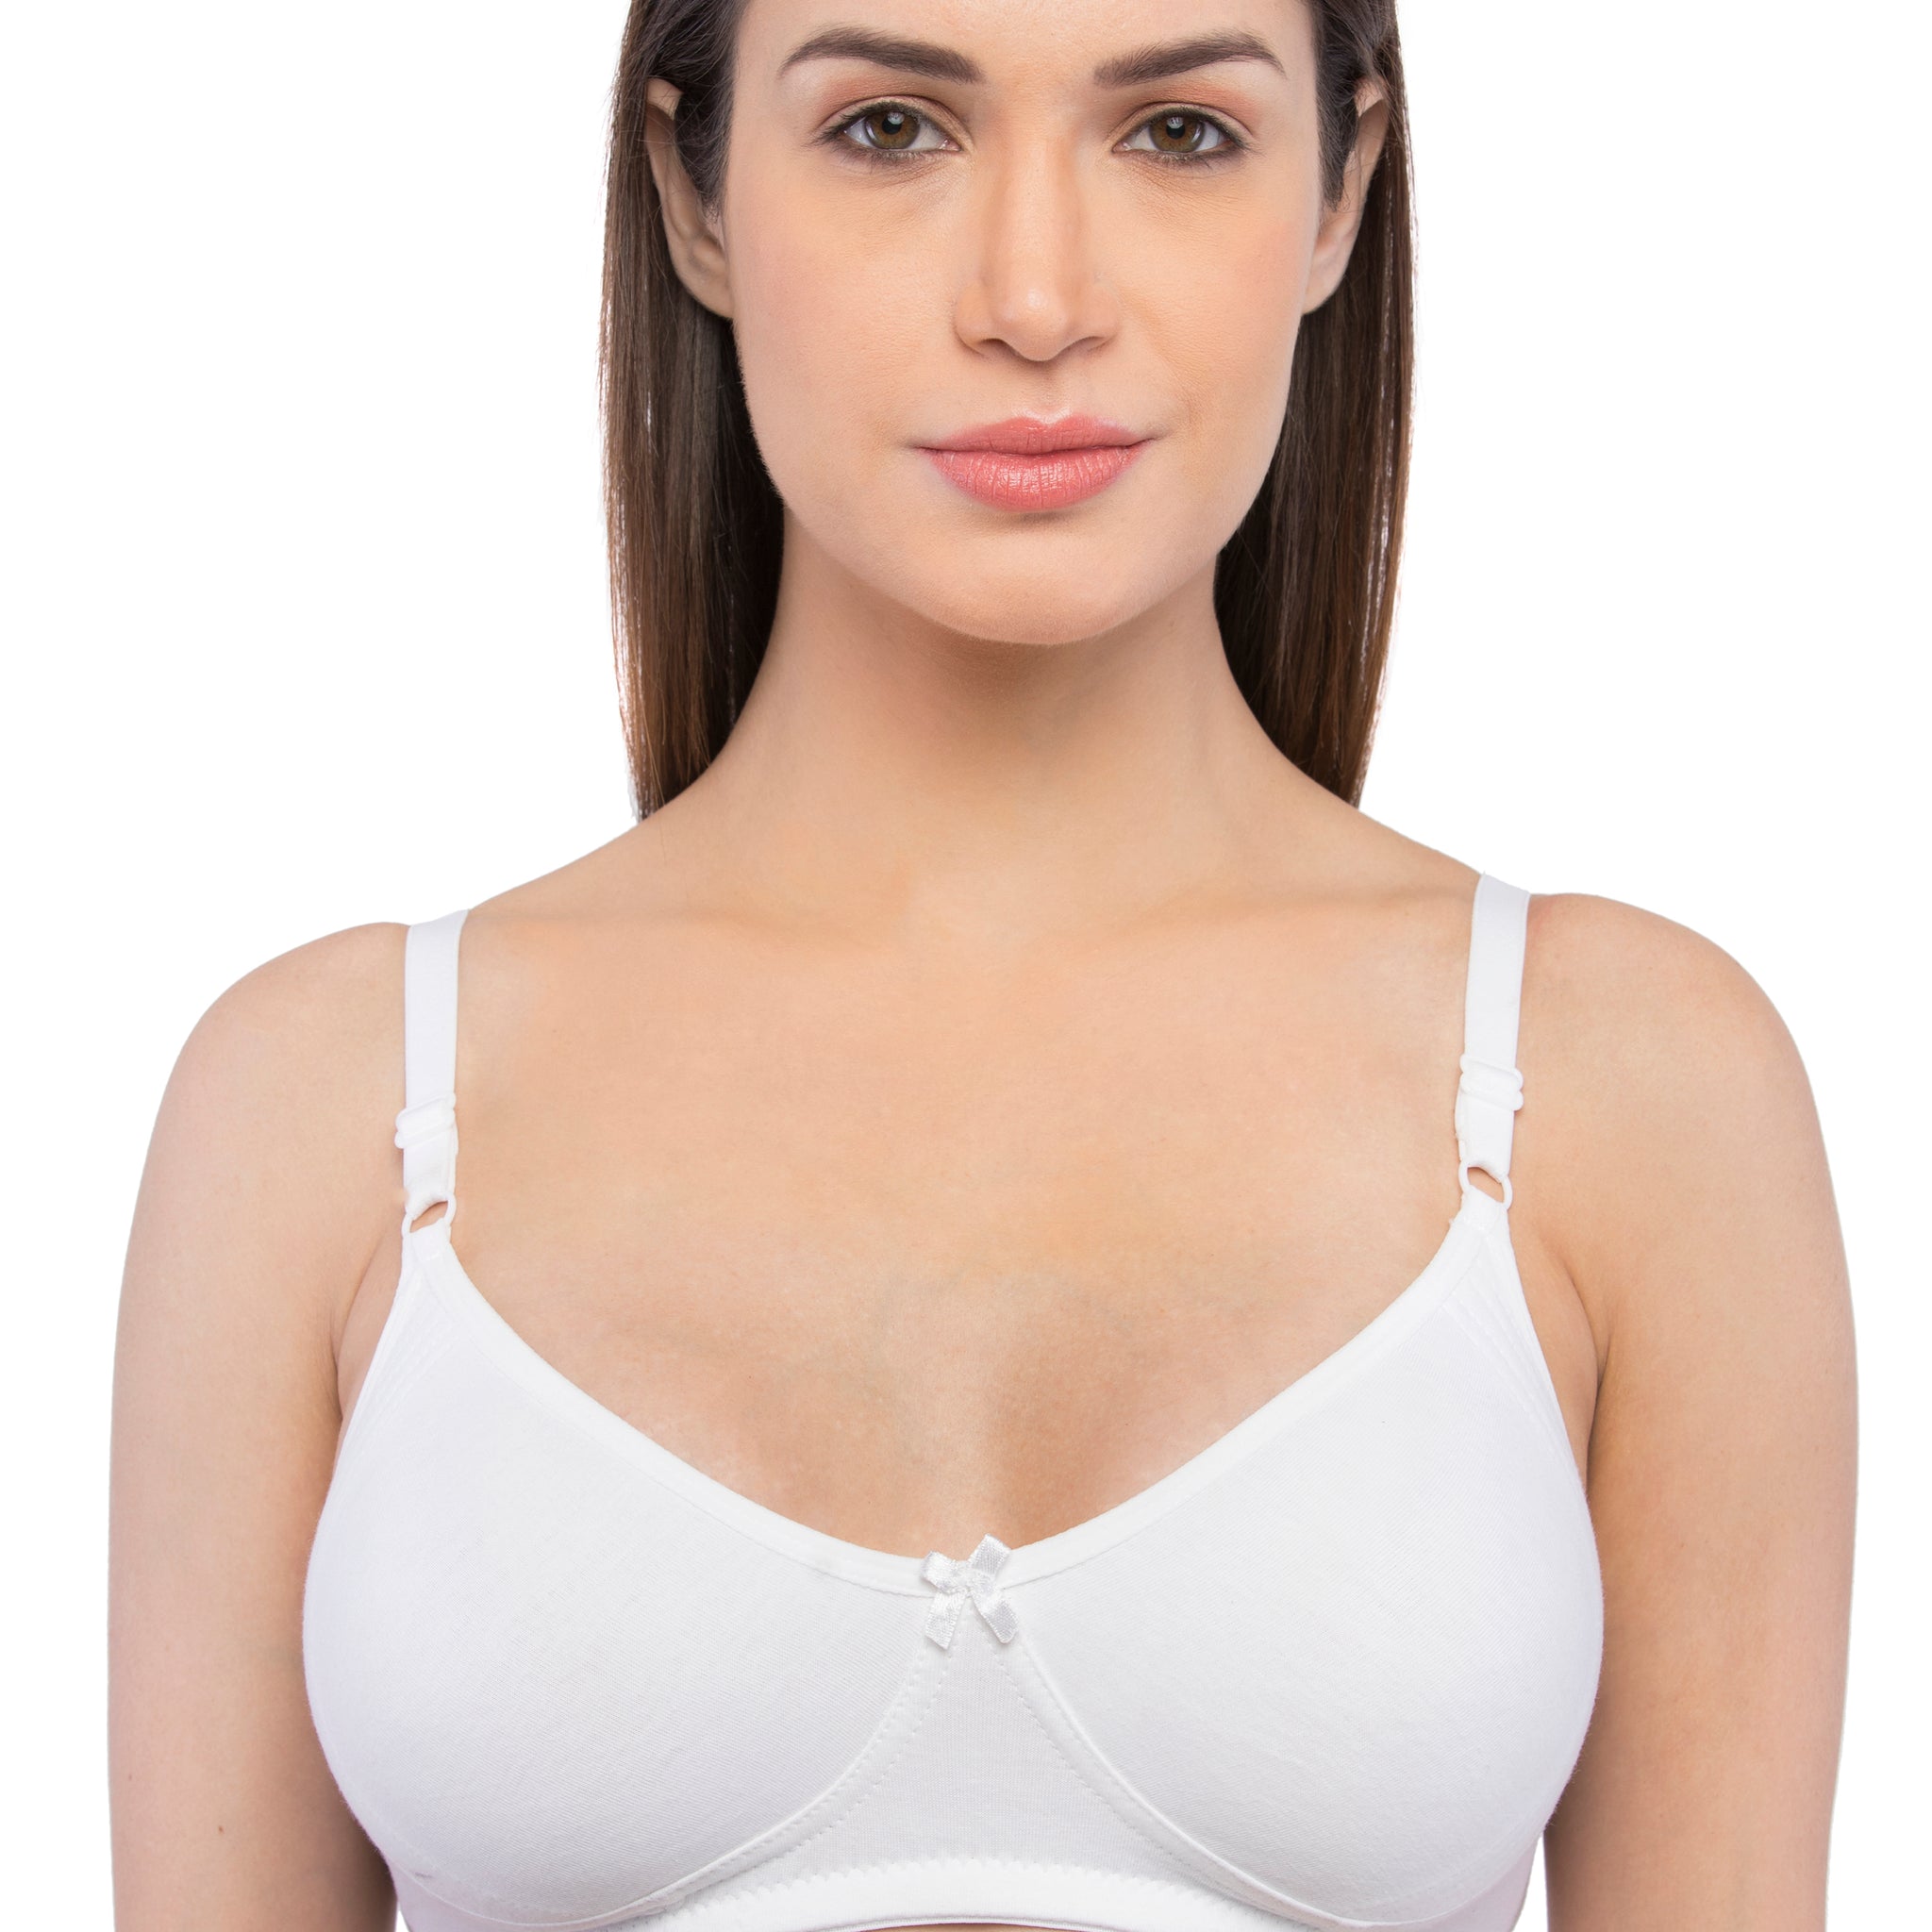 Stylish Ladies Undergarments at best price in Noida by Valyou One Services